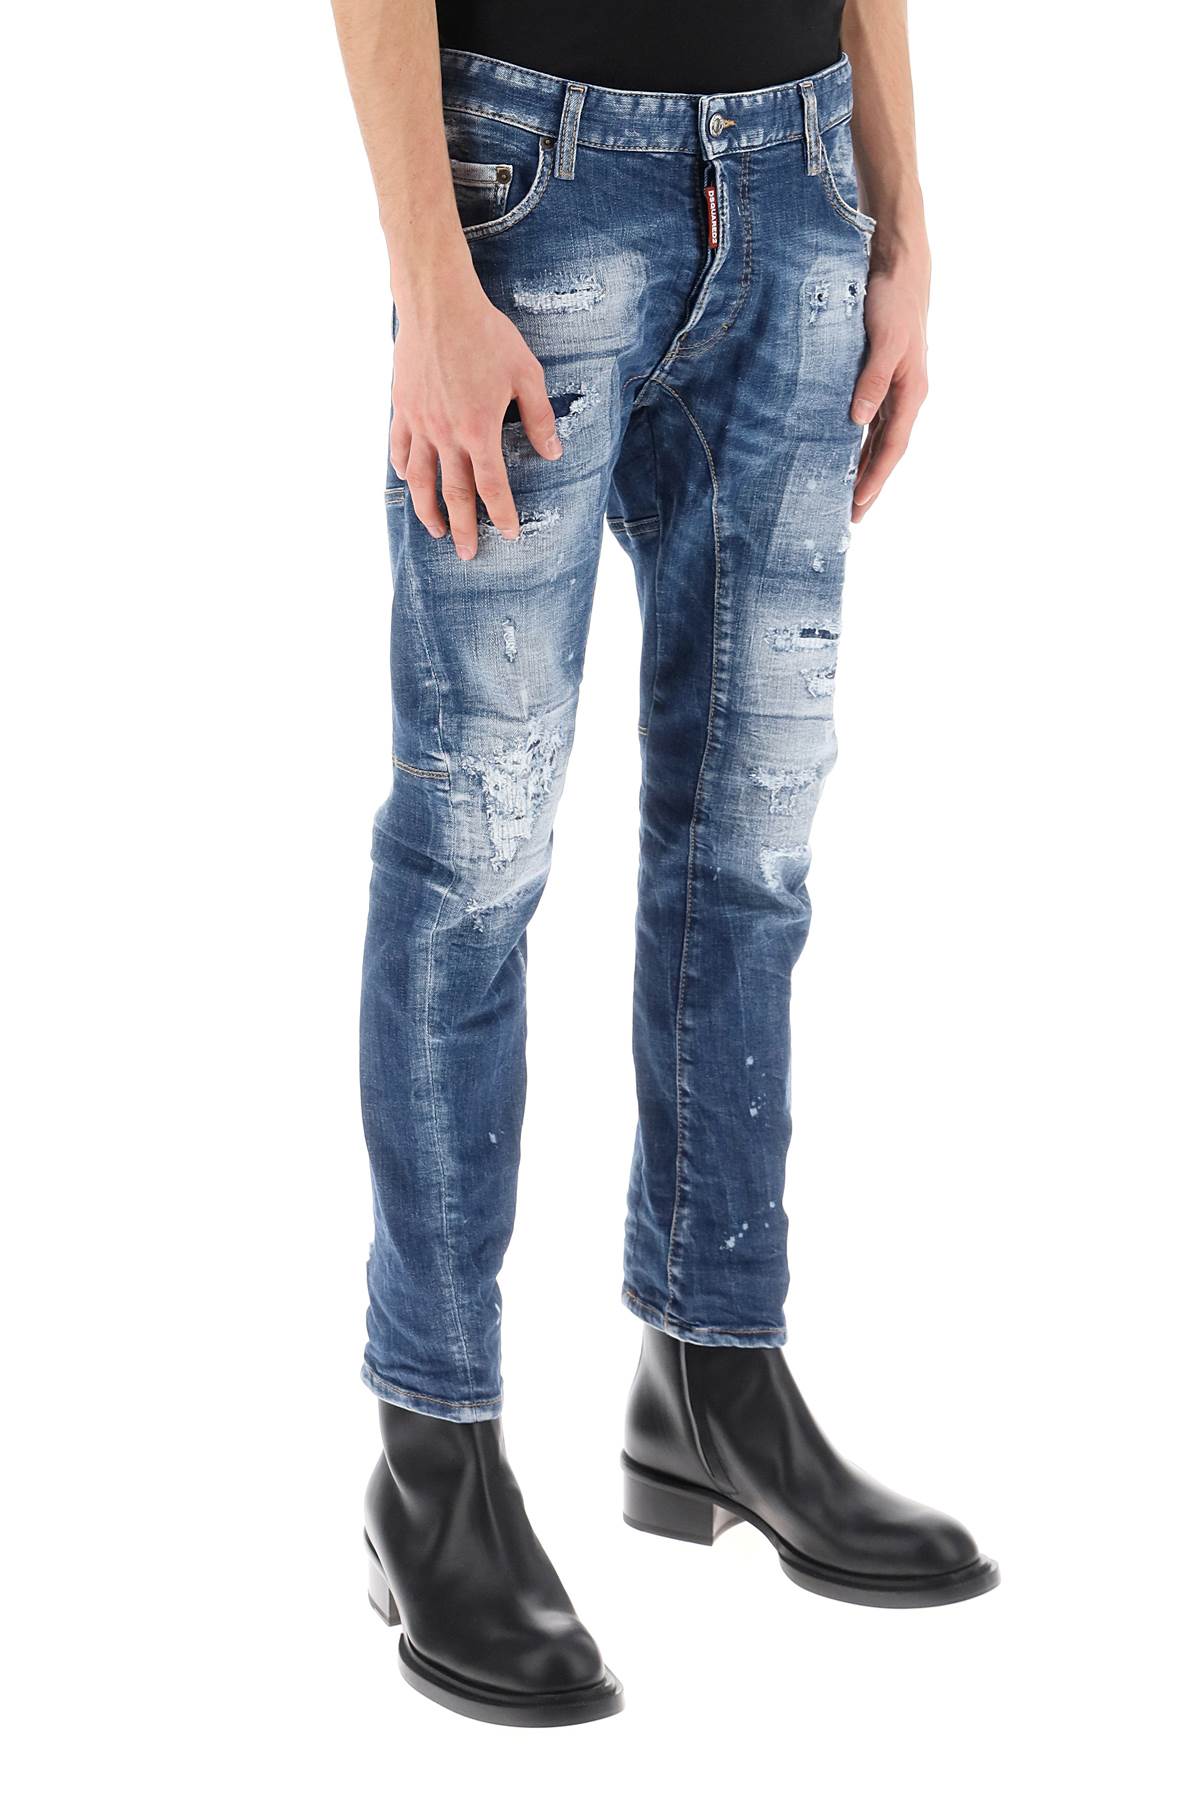 Dsquared2 Dsquared2 medium mended rips wash tidy biker jeans